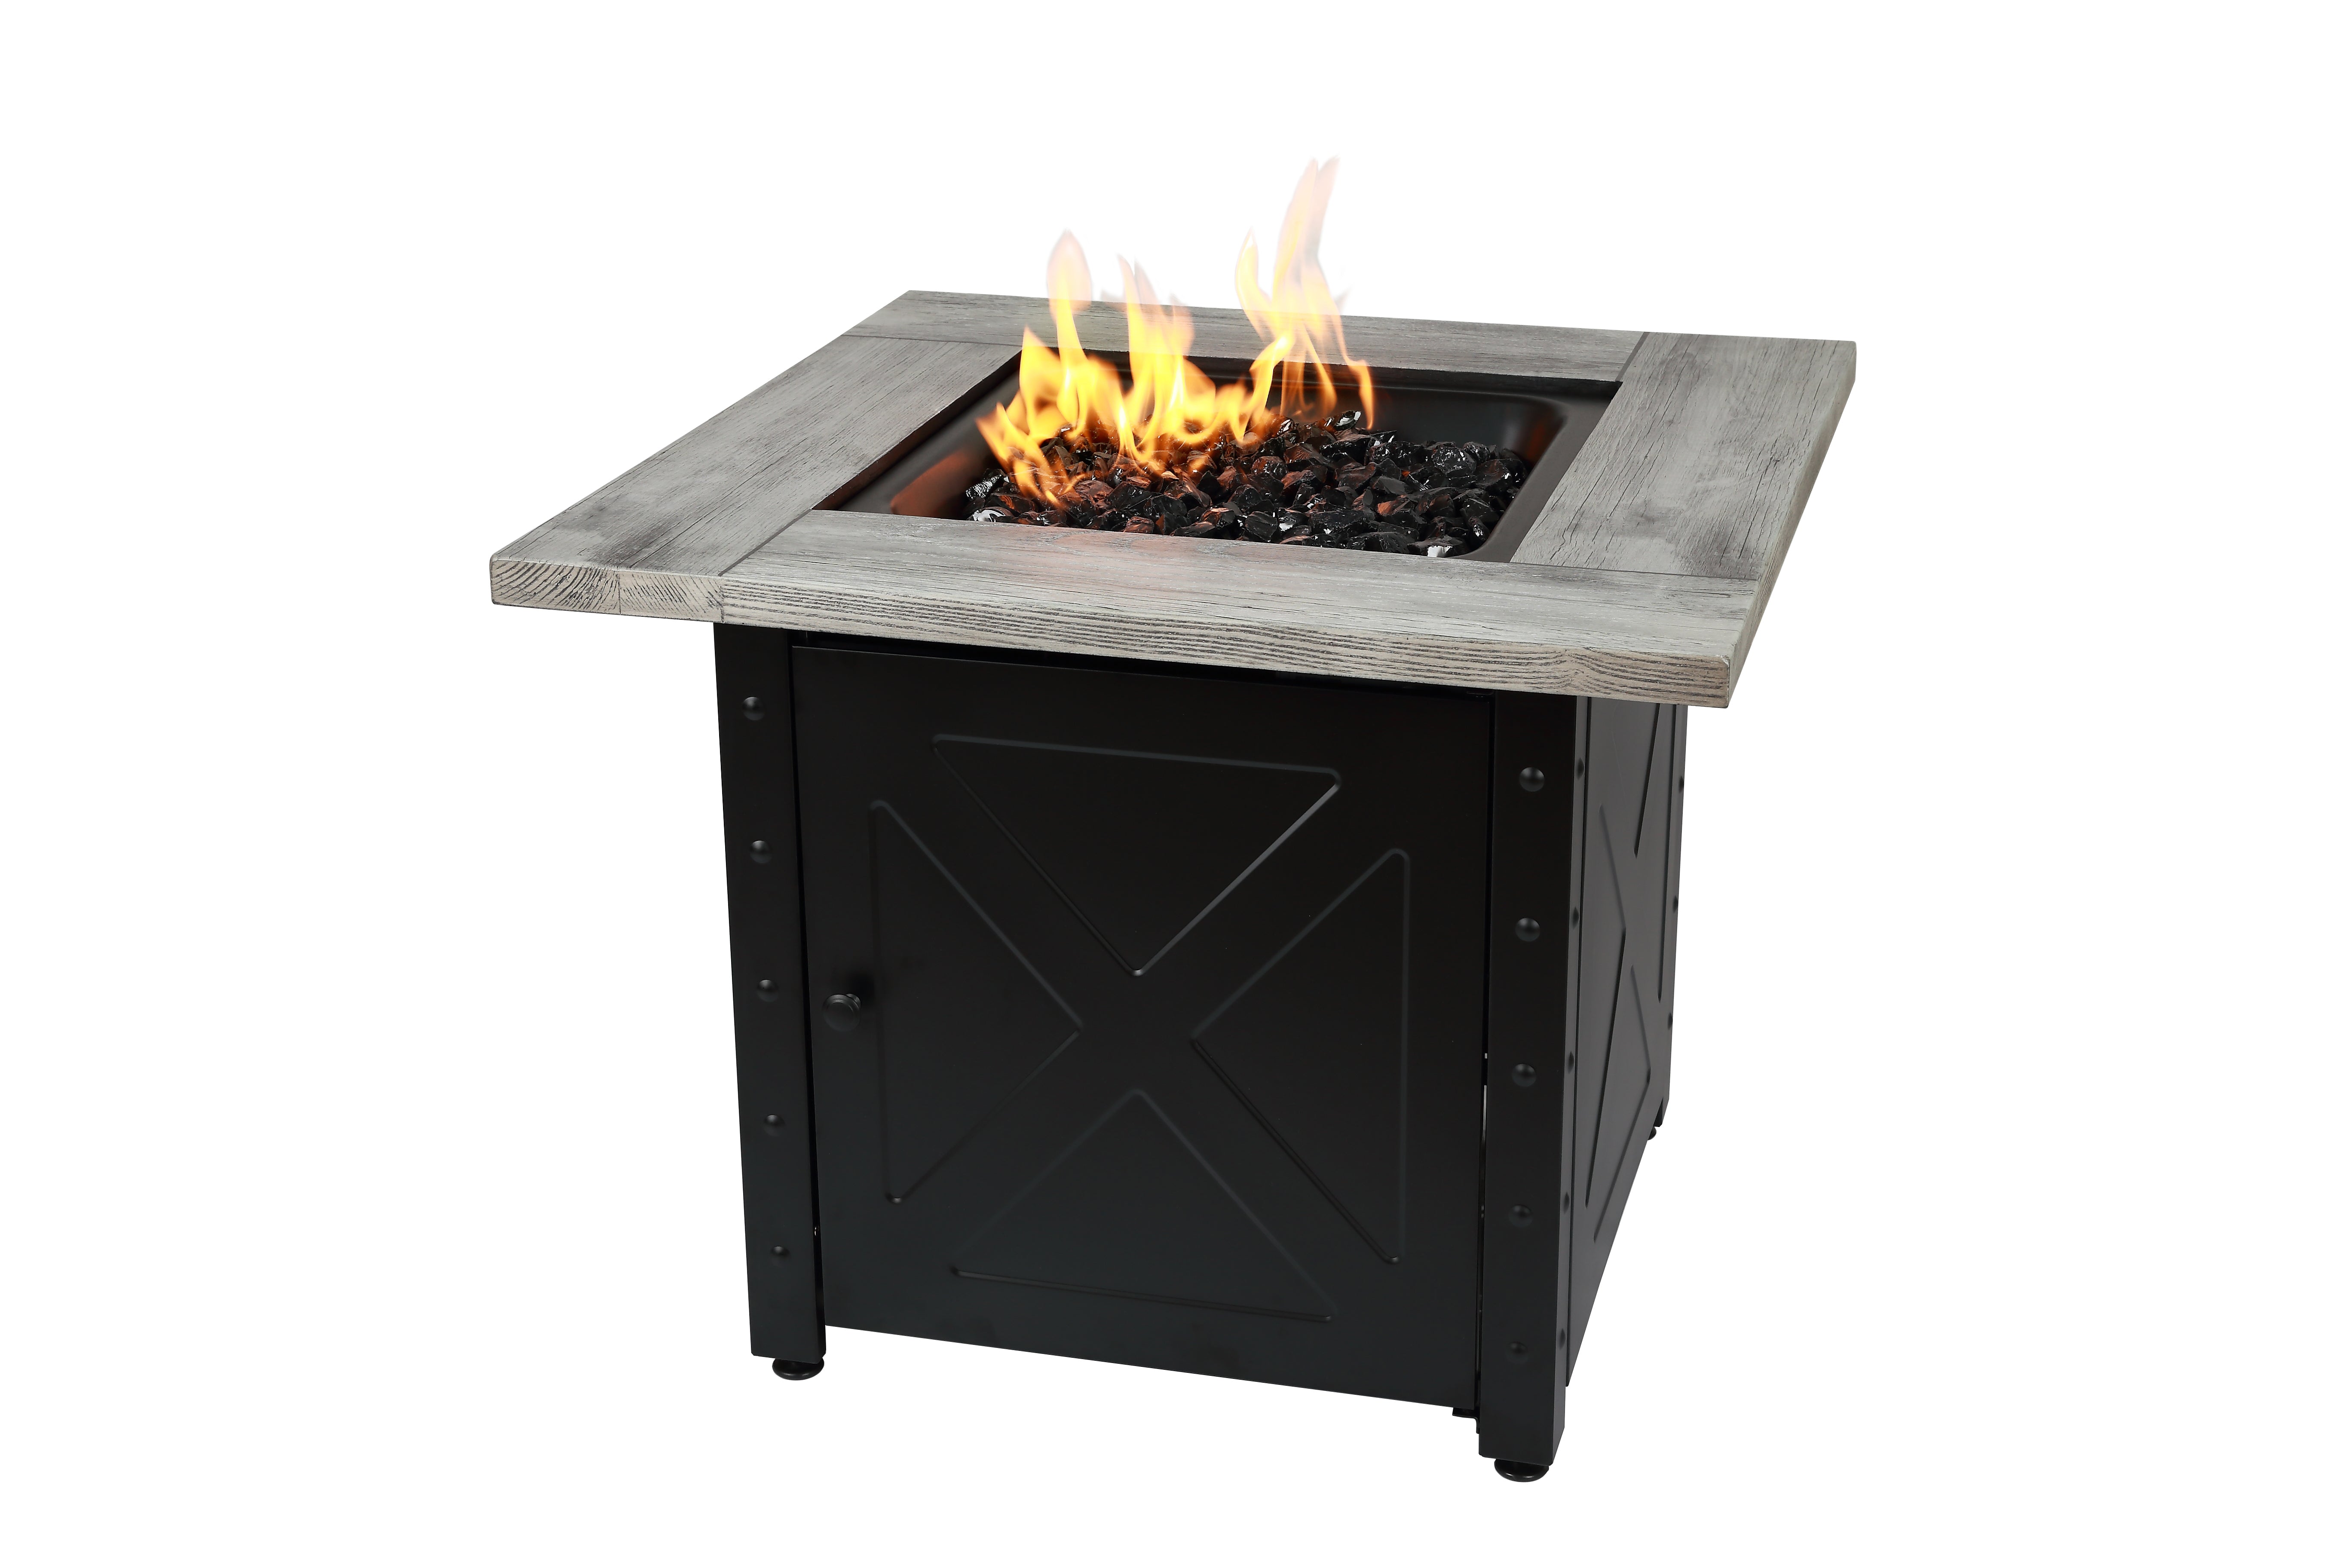 Endless Summer The Mason, 30" Square Gas Outdoor Fire Pit with Printed Wood Lat look Cement Resin Mantel